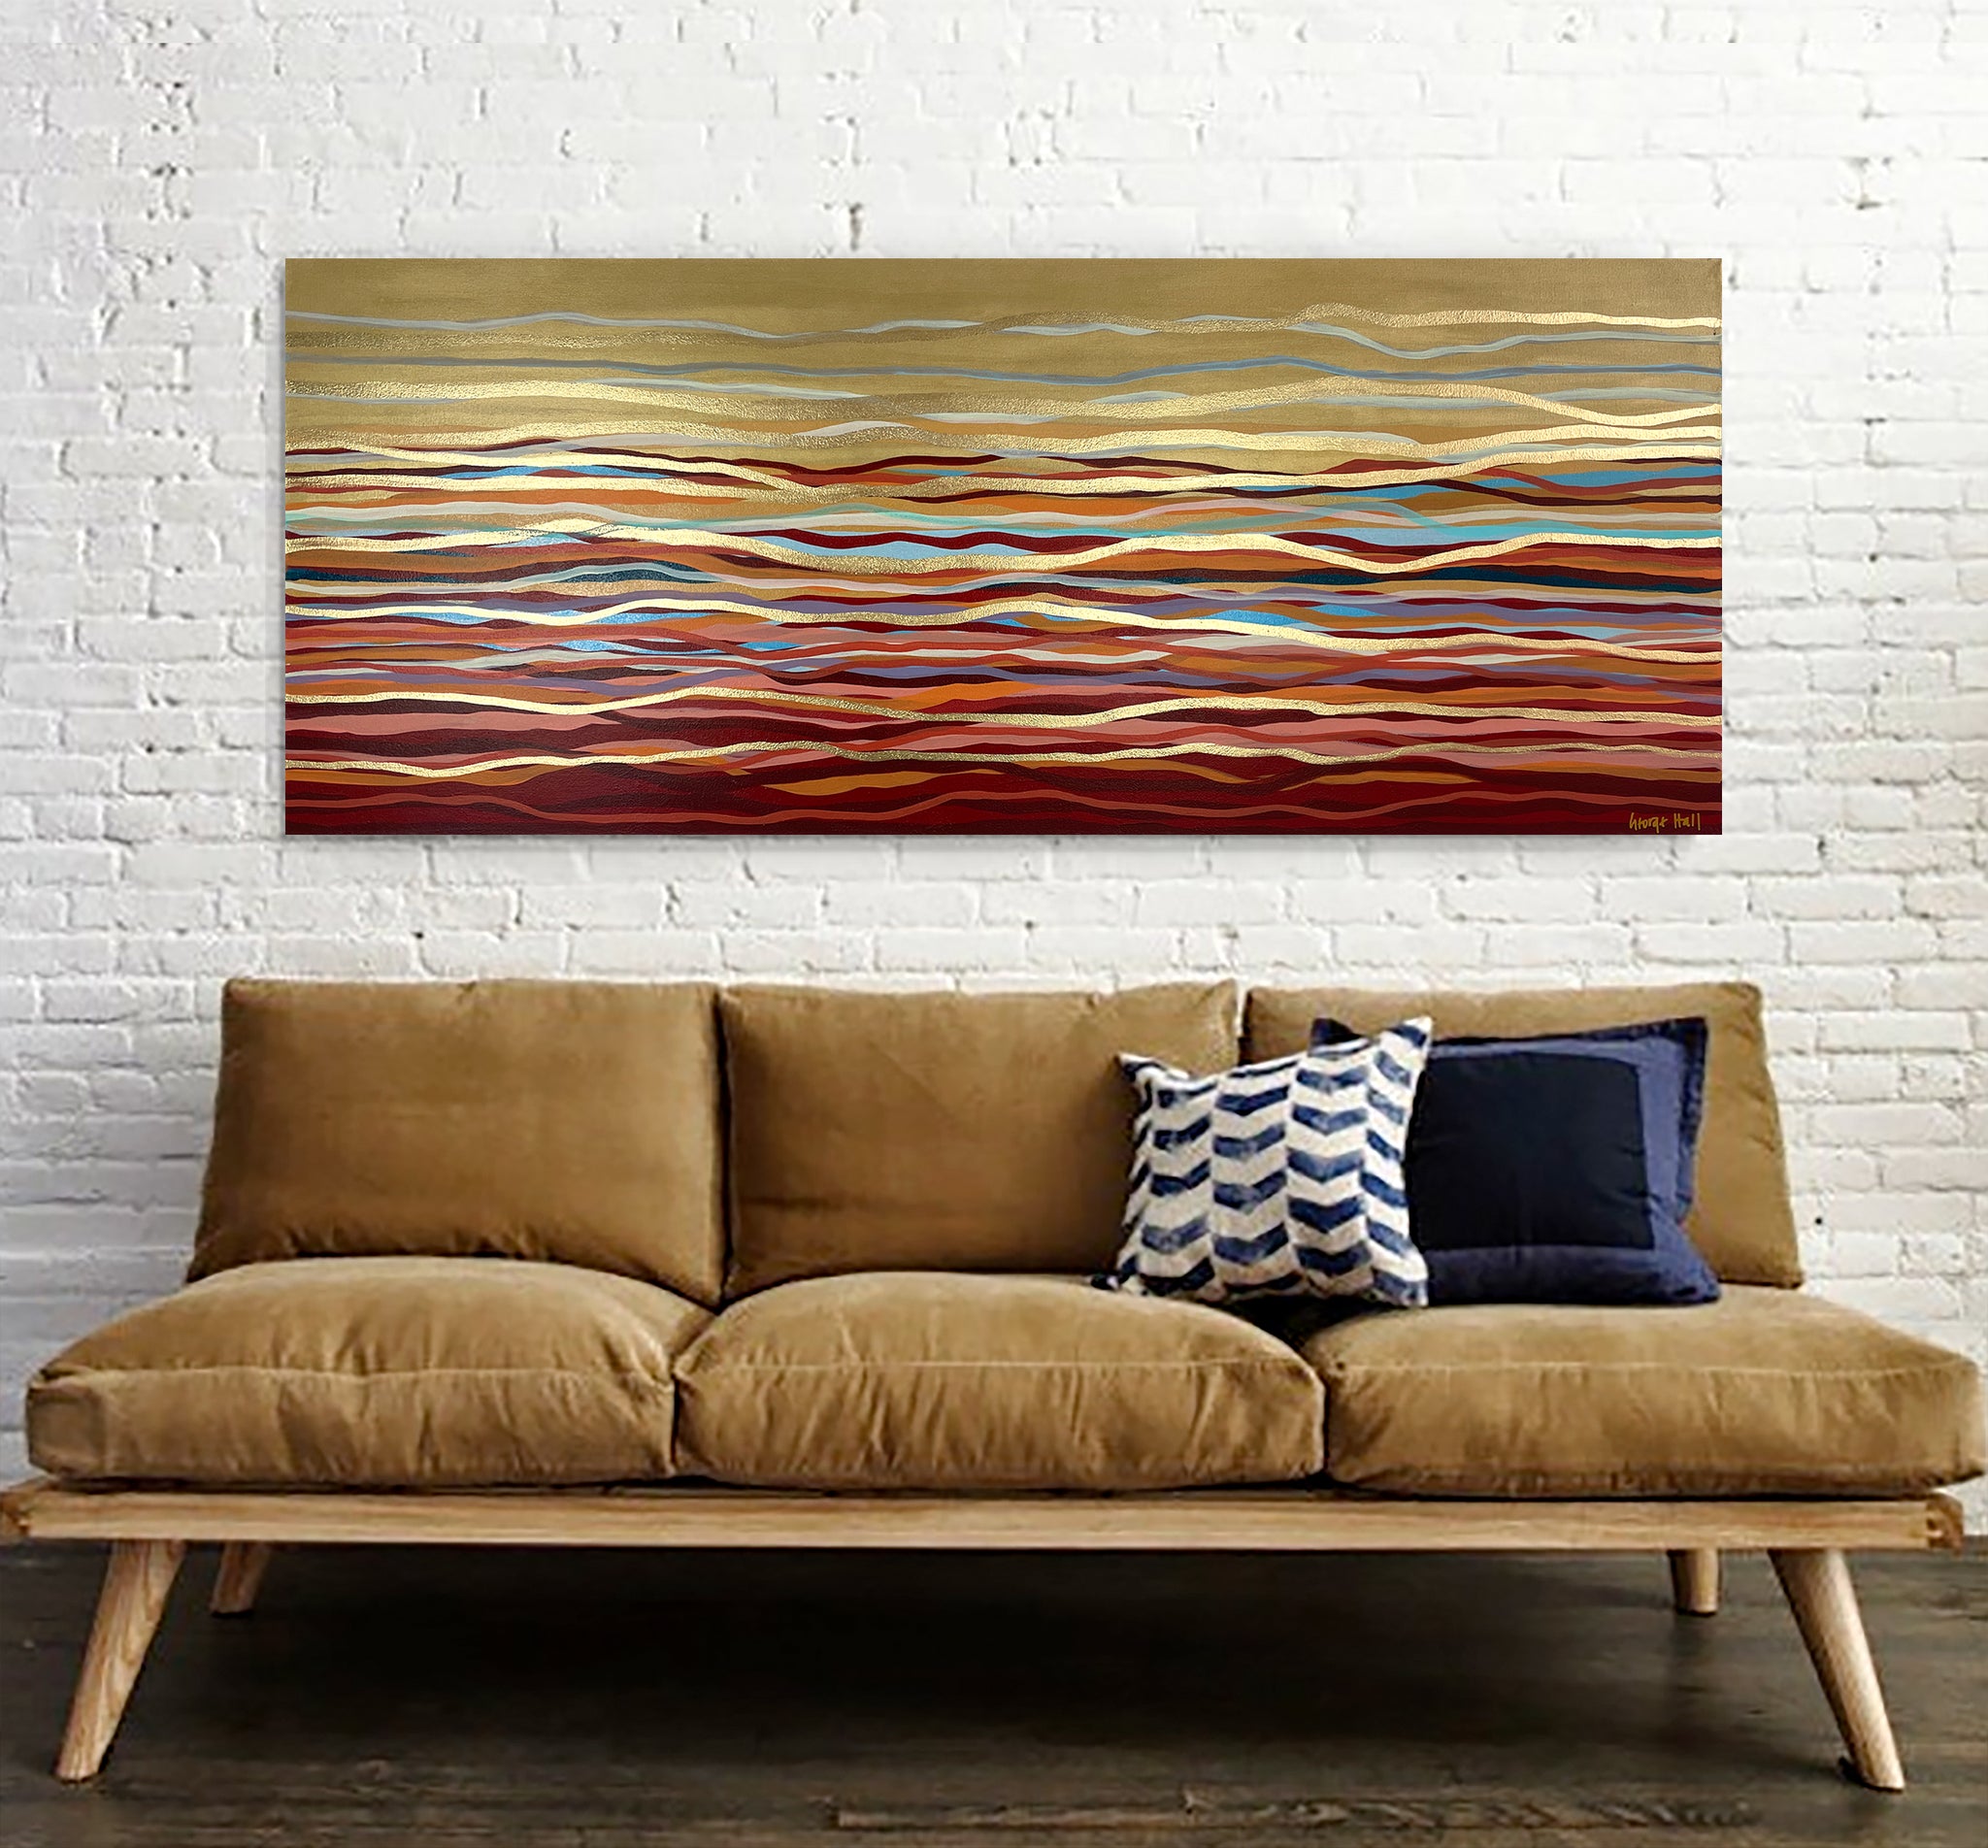 Golden Outback - 152 x 61 cm - metallic gold paint and acrylic on canvas